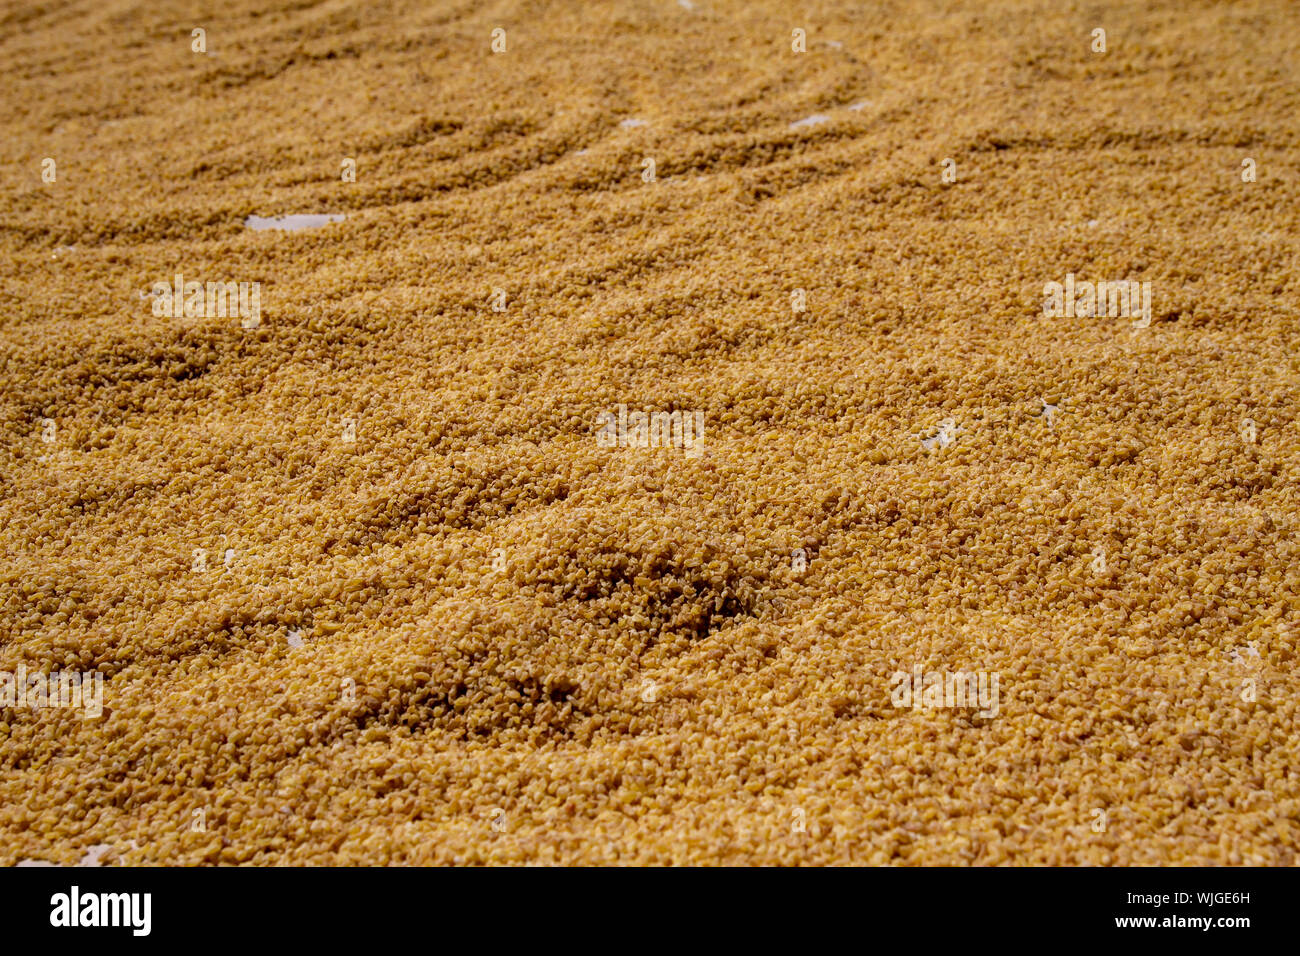 Bulgur for use as background image or as texture Stock Photo